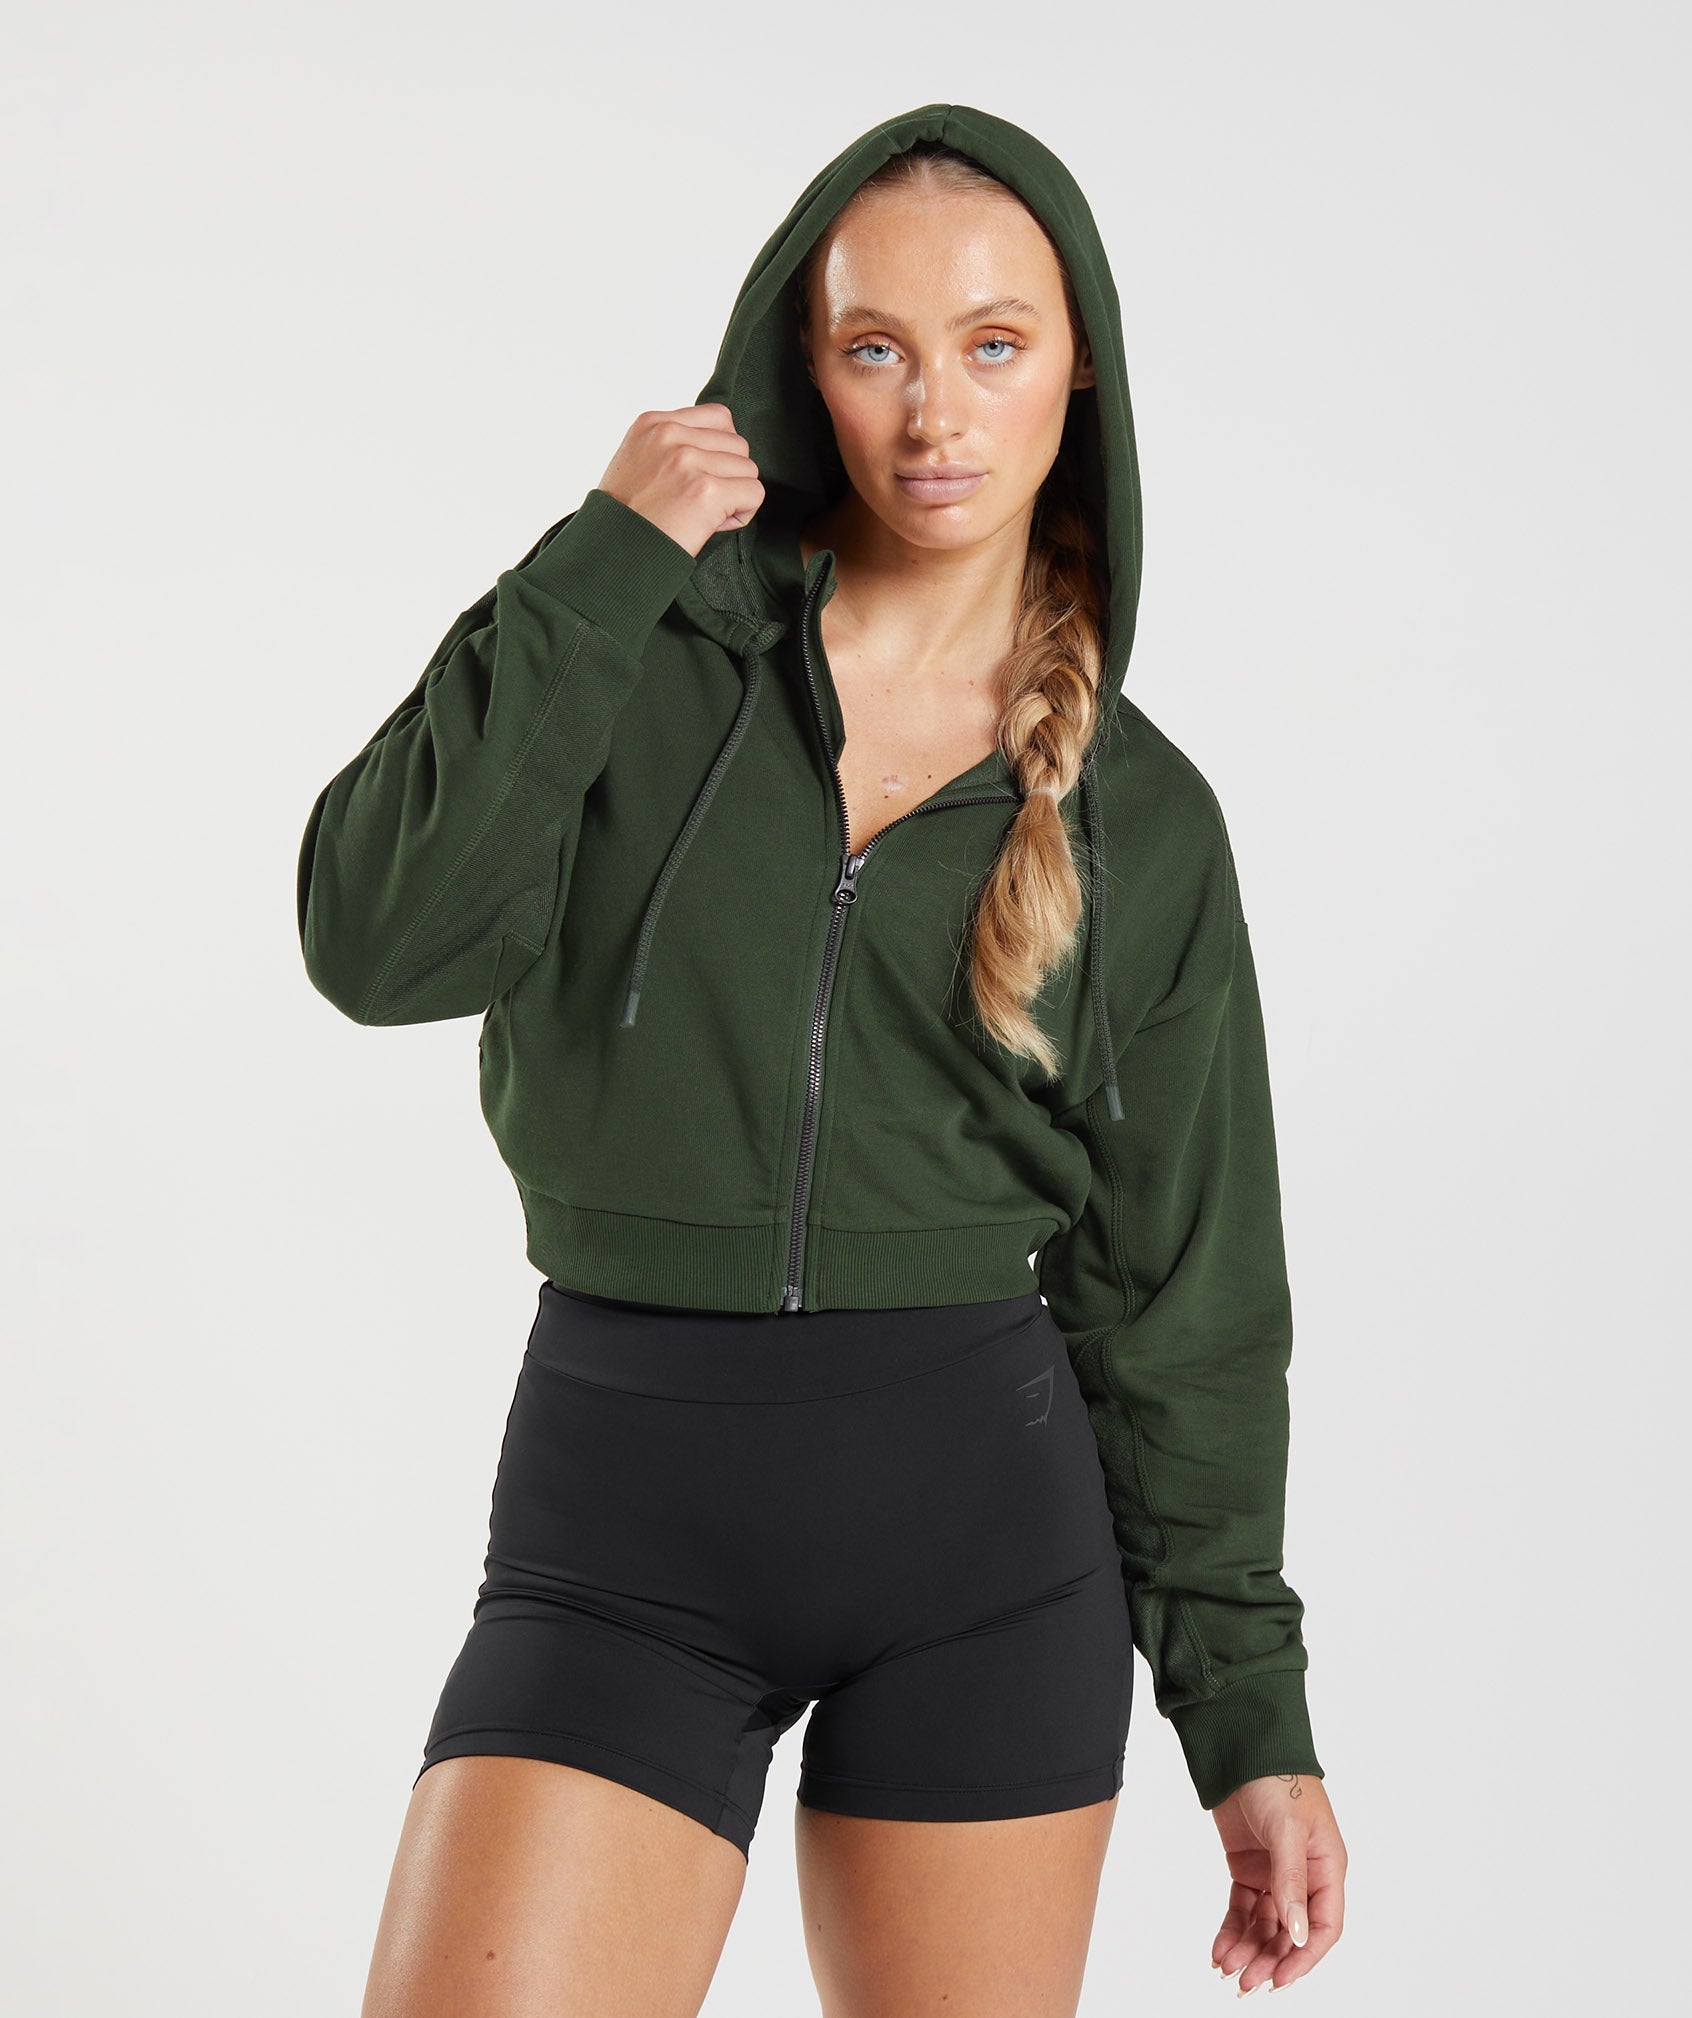 GS Power Cropped Zip Hoodie in Moss Olive